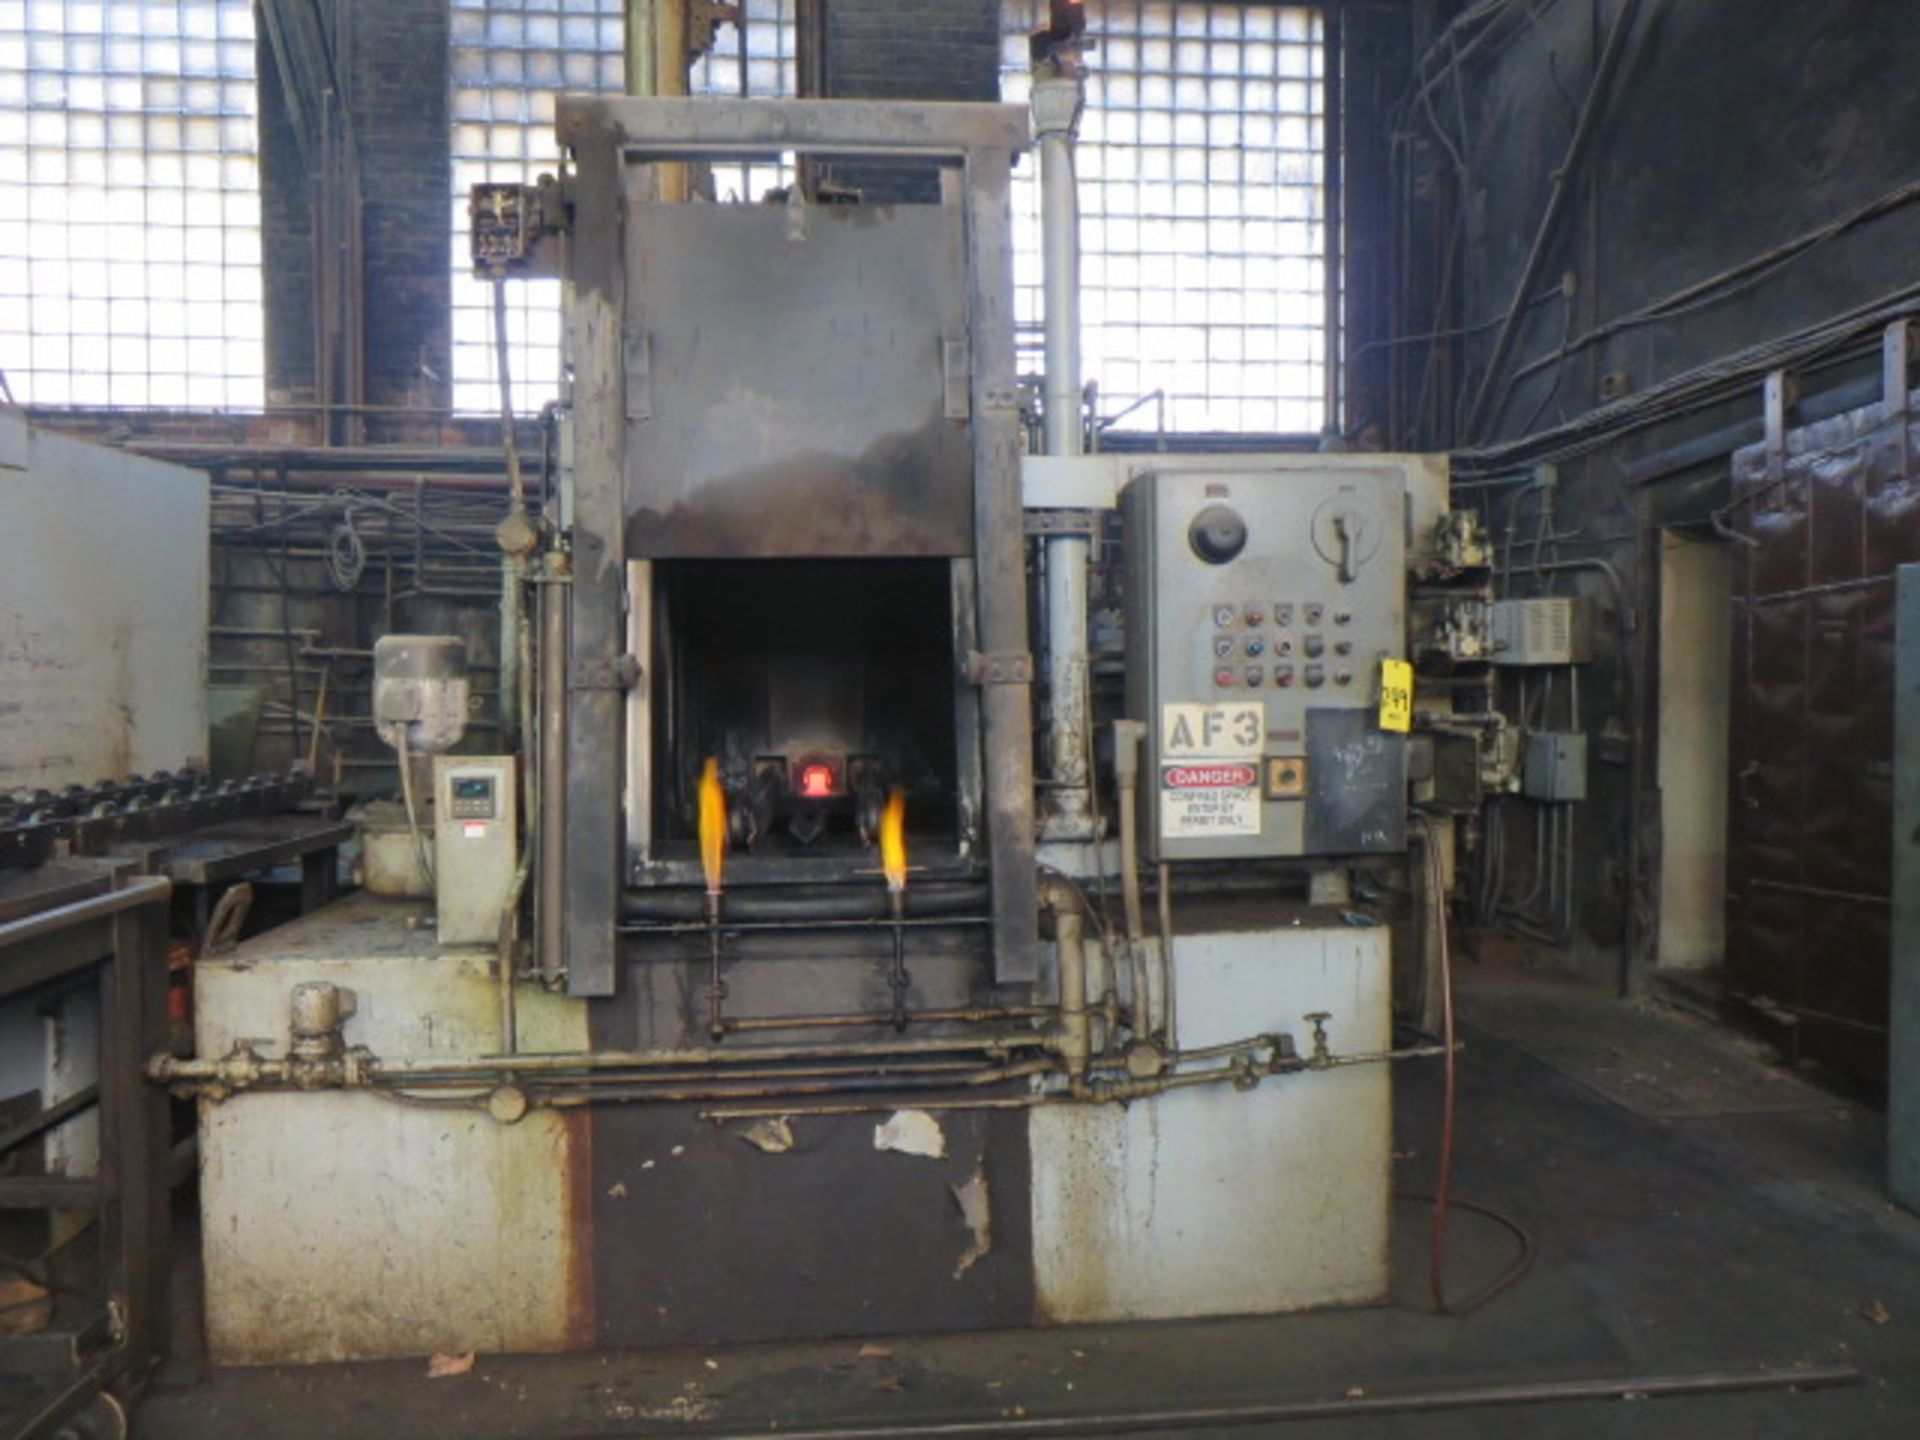 SURFACE COMBUSTION Power Convection AllCase Controlled Atmosphere Furnace, S/N 36757-1,...